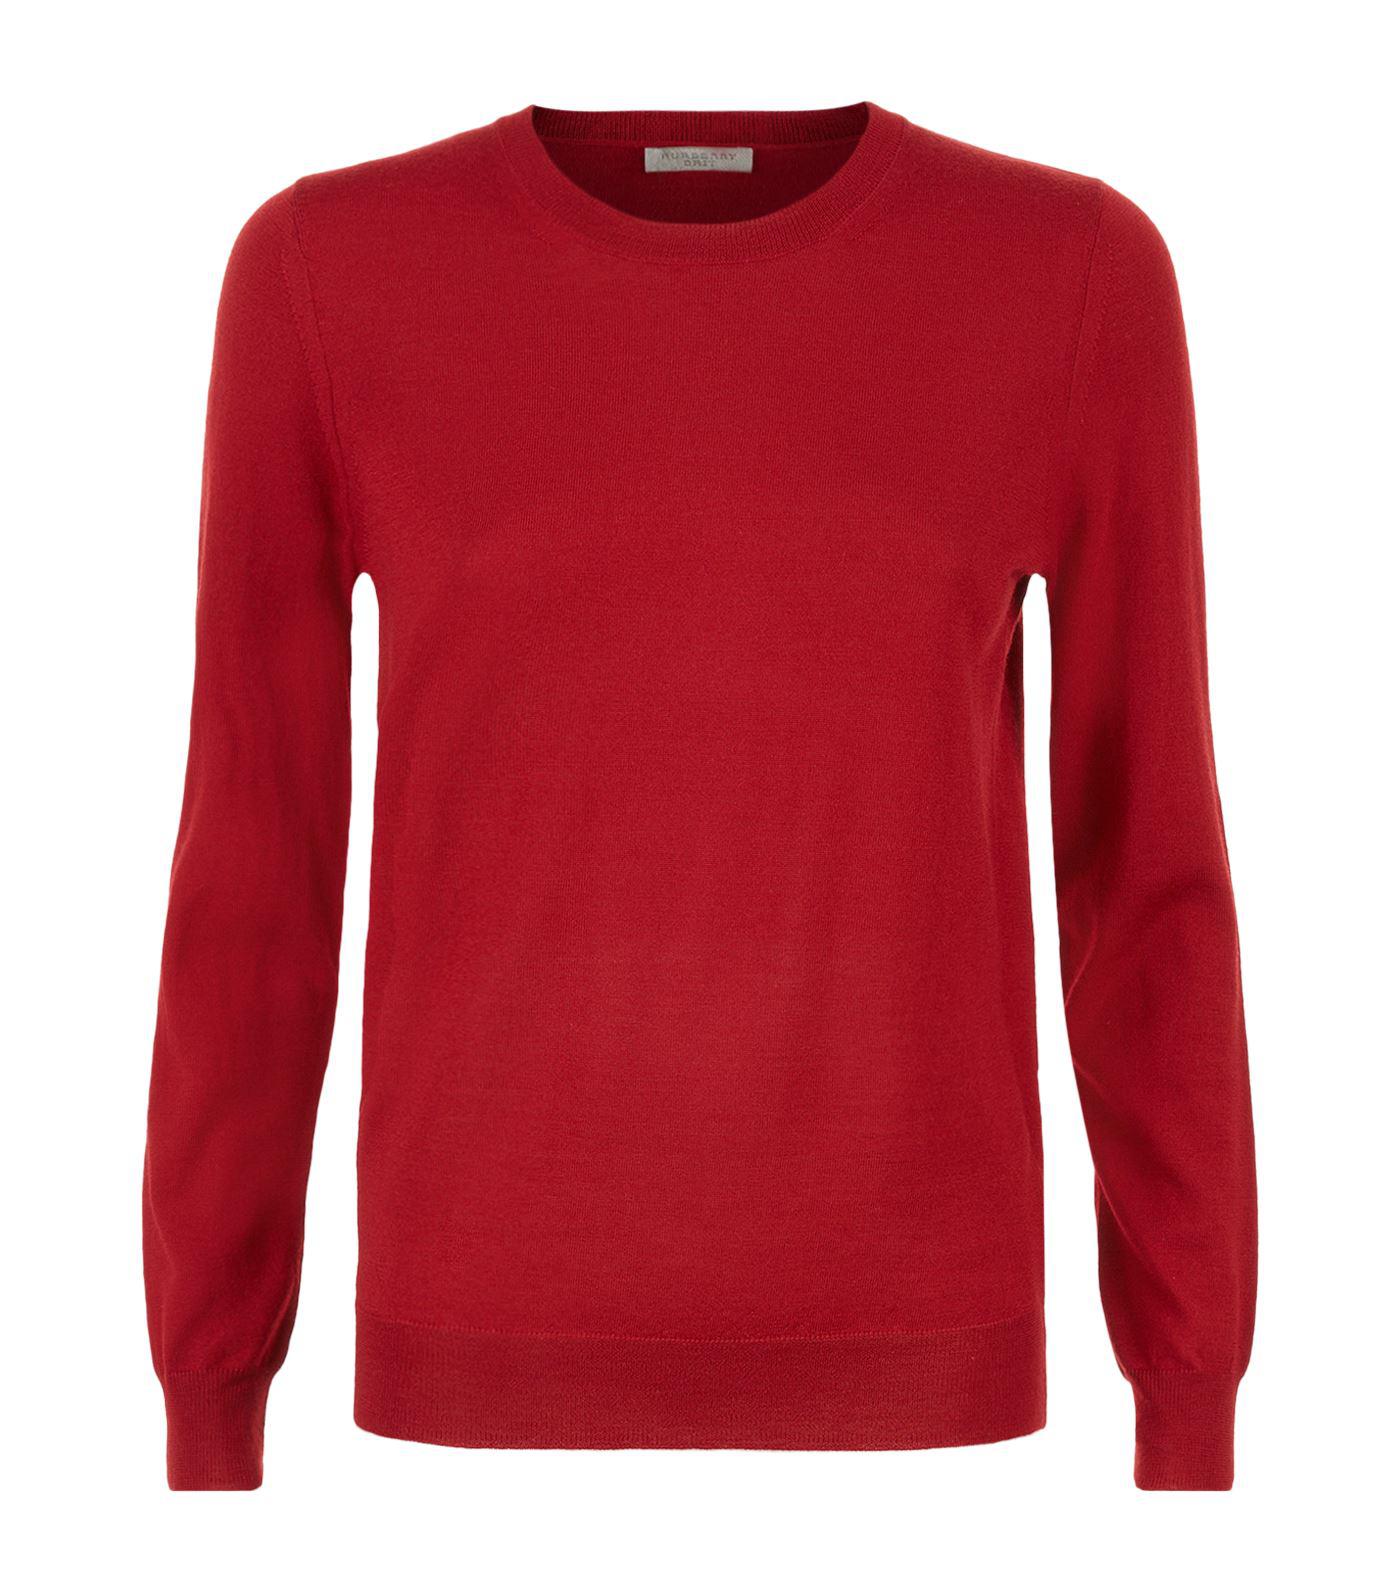 Lyst - Burberry Merino Wool Elbow Patch Sweater in Red